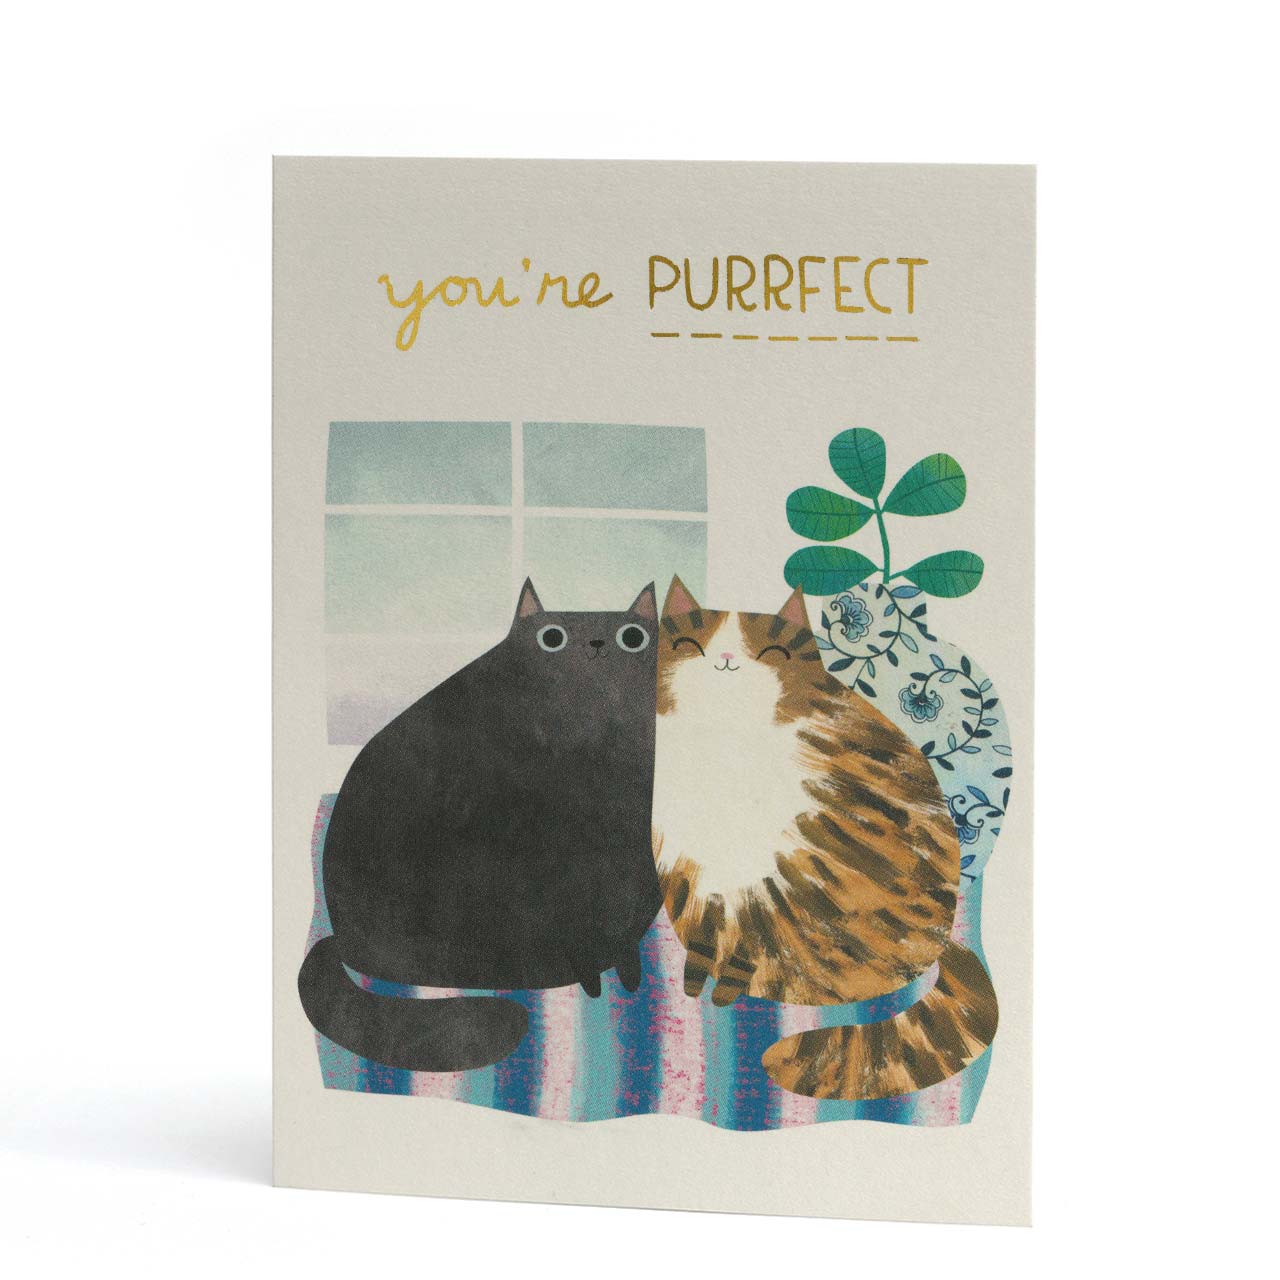 You're Purrfect Gold Foil Greeting Card